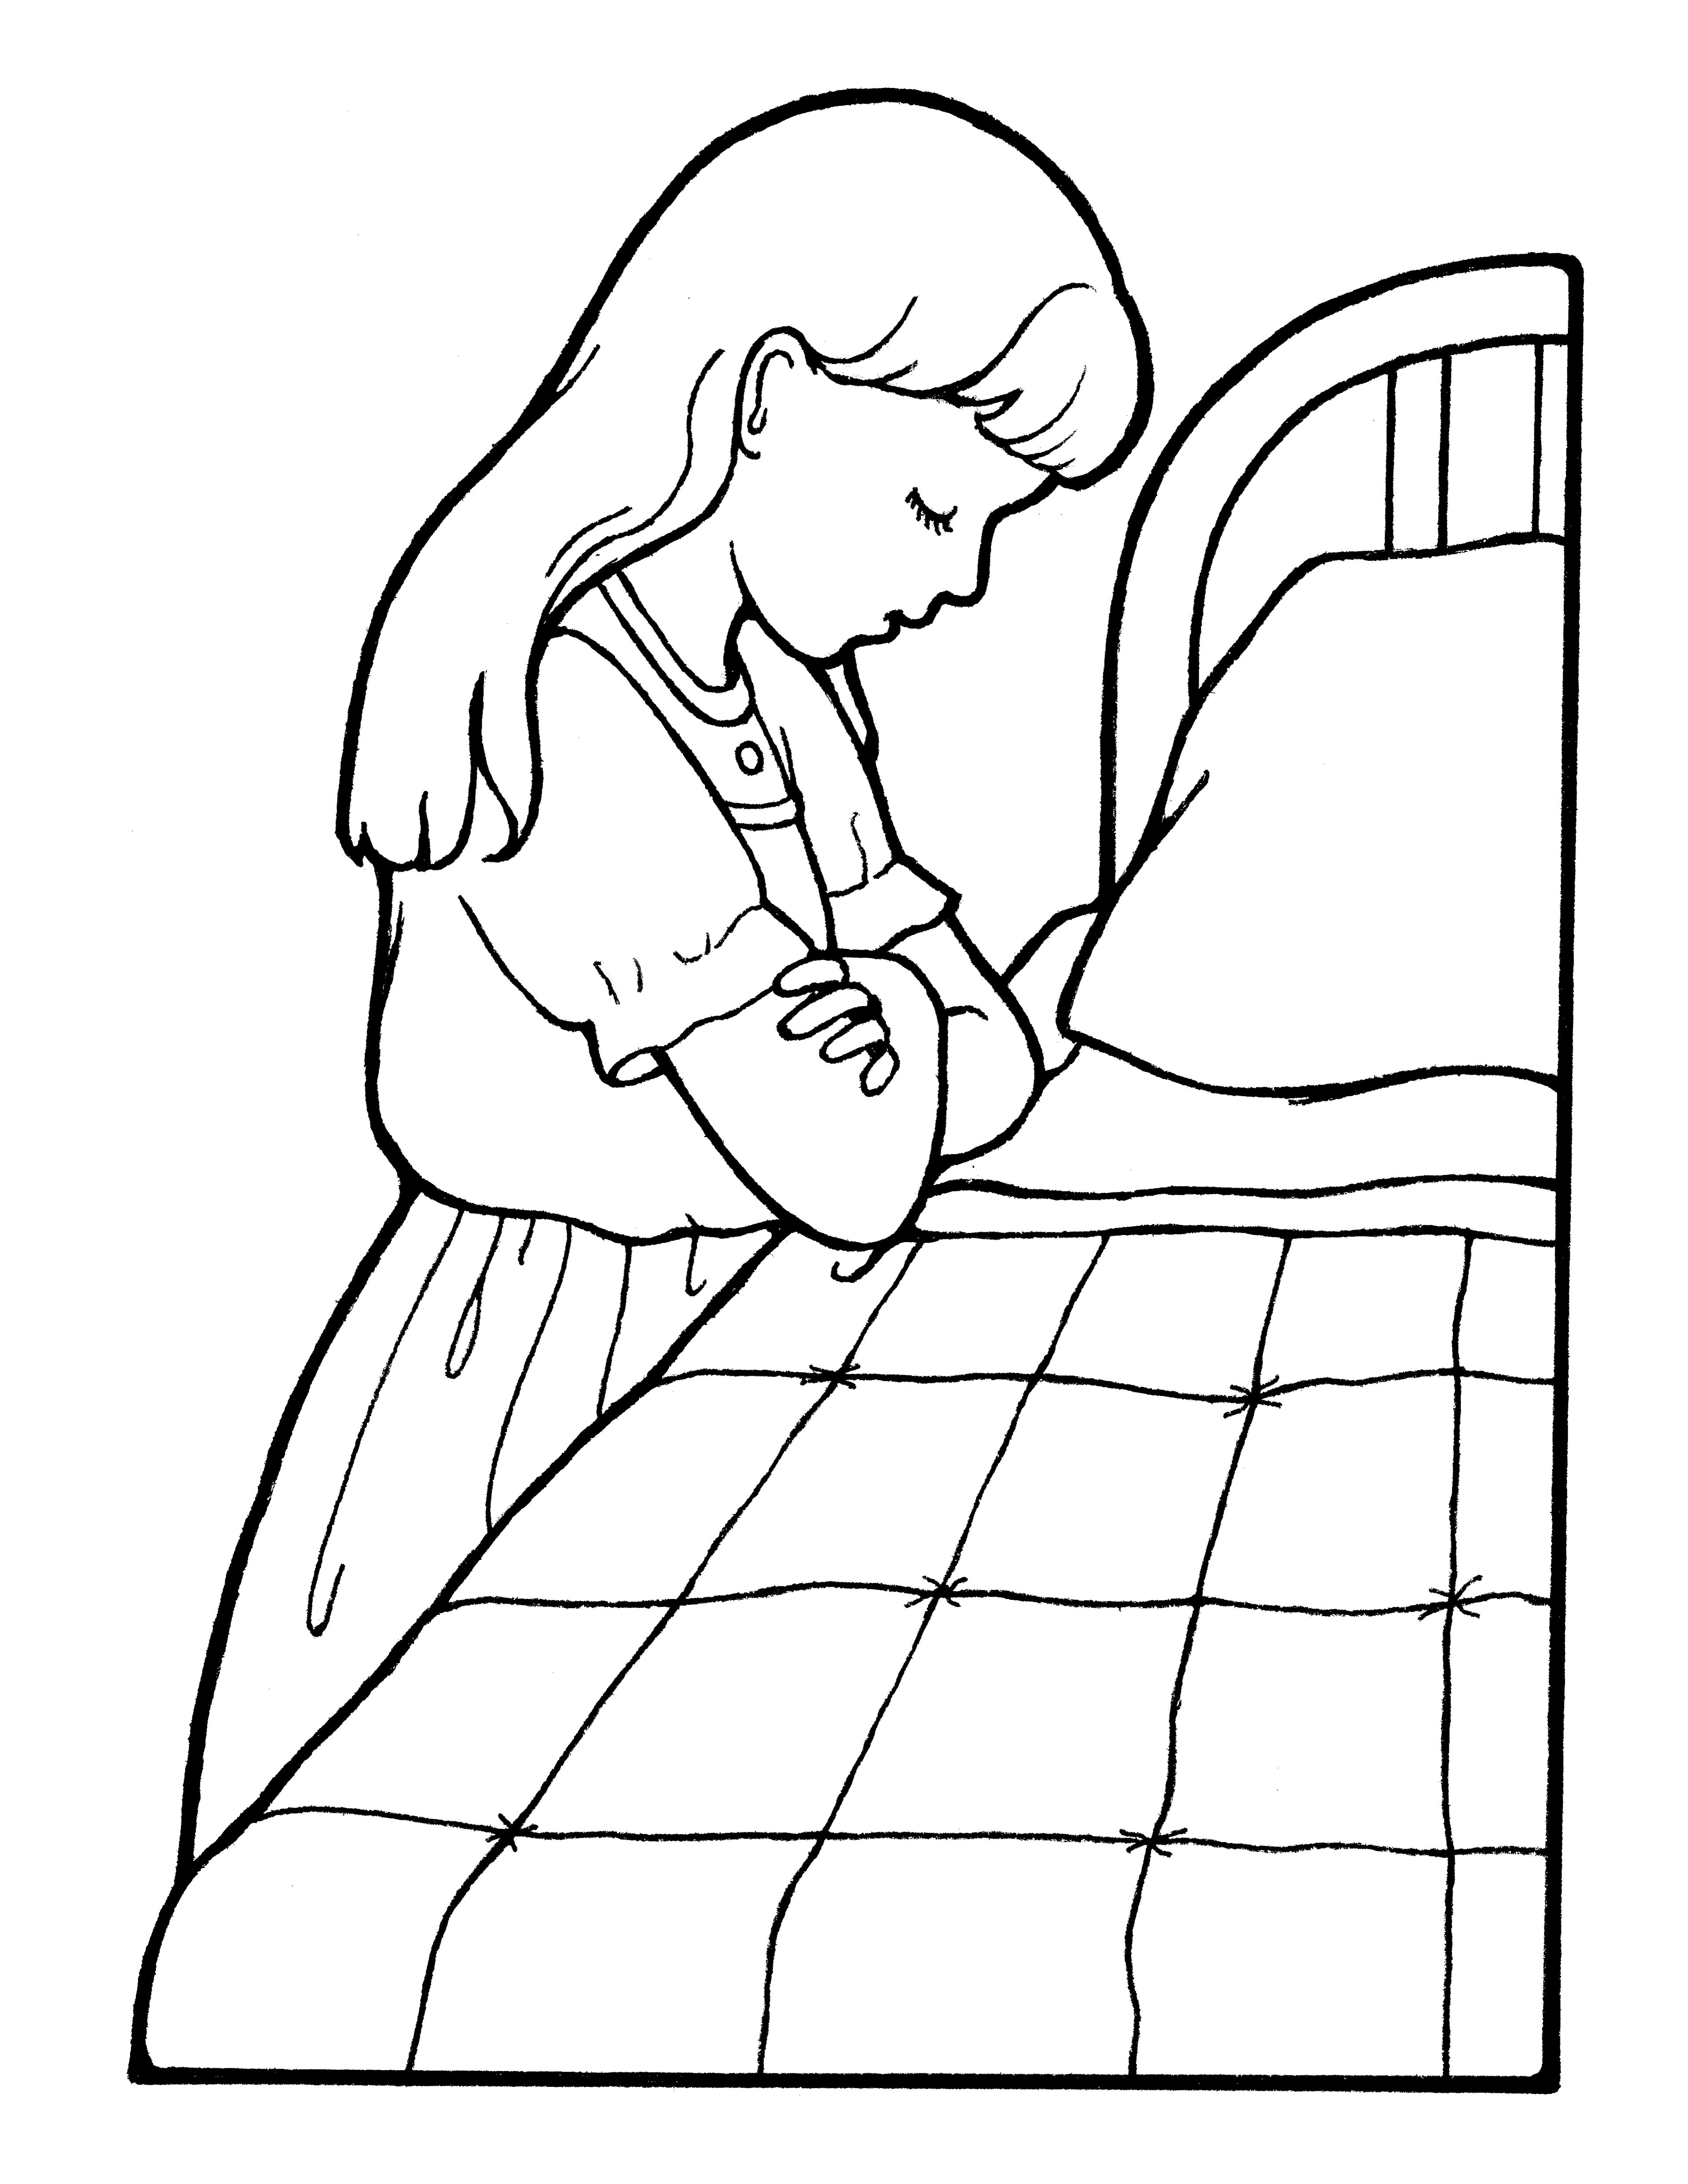 A picture of a girl praying by her bedside before bed.